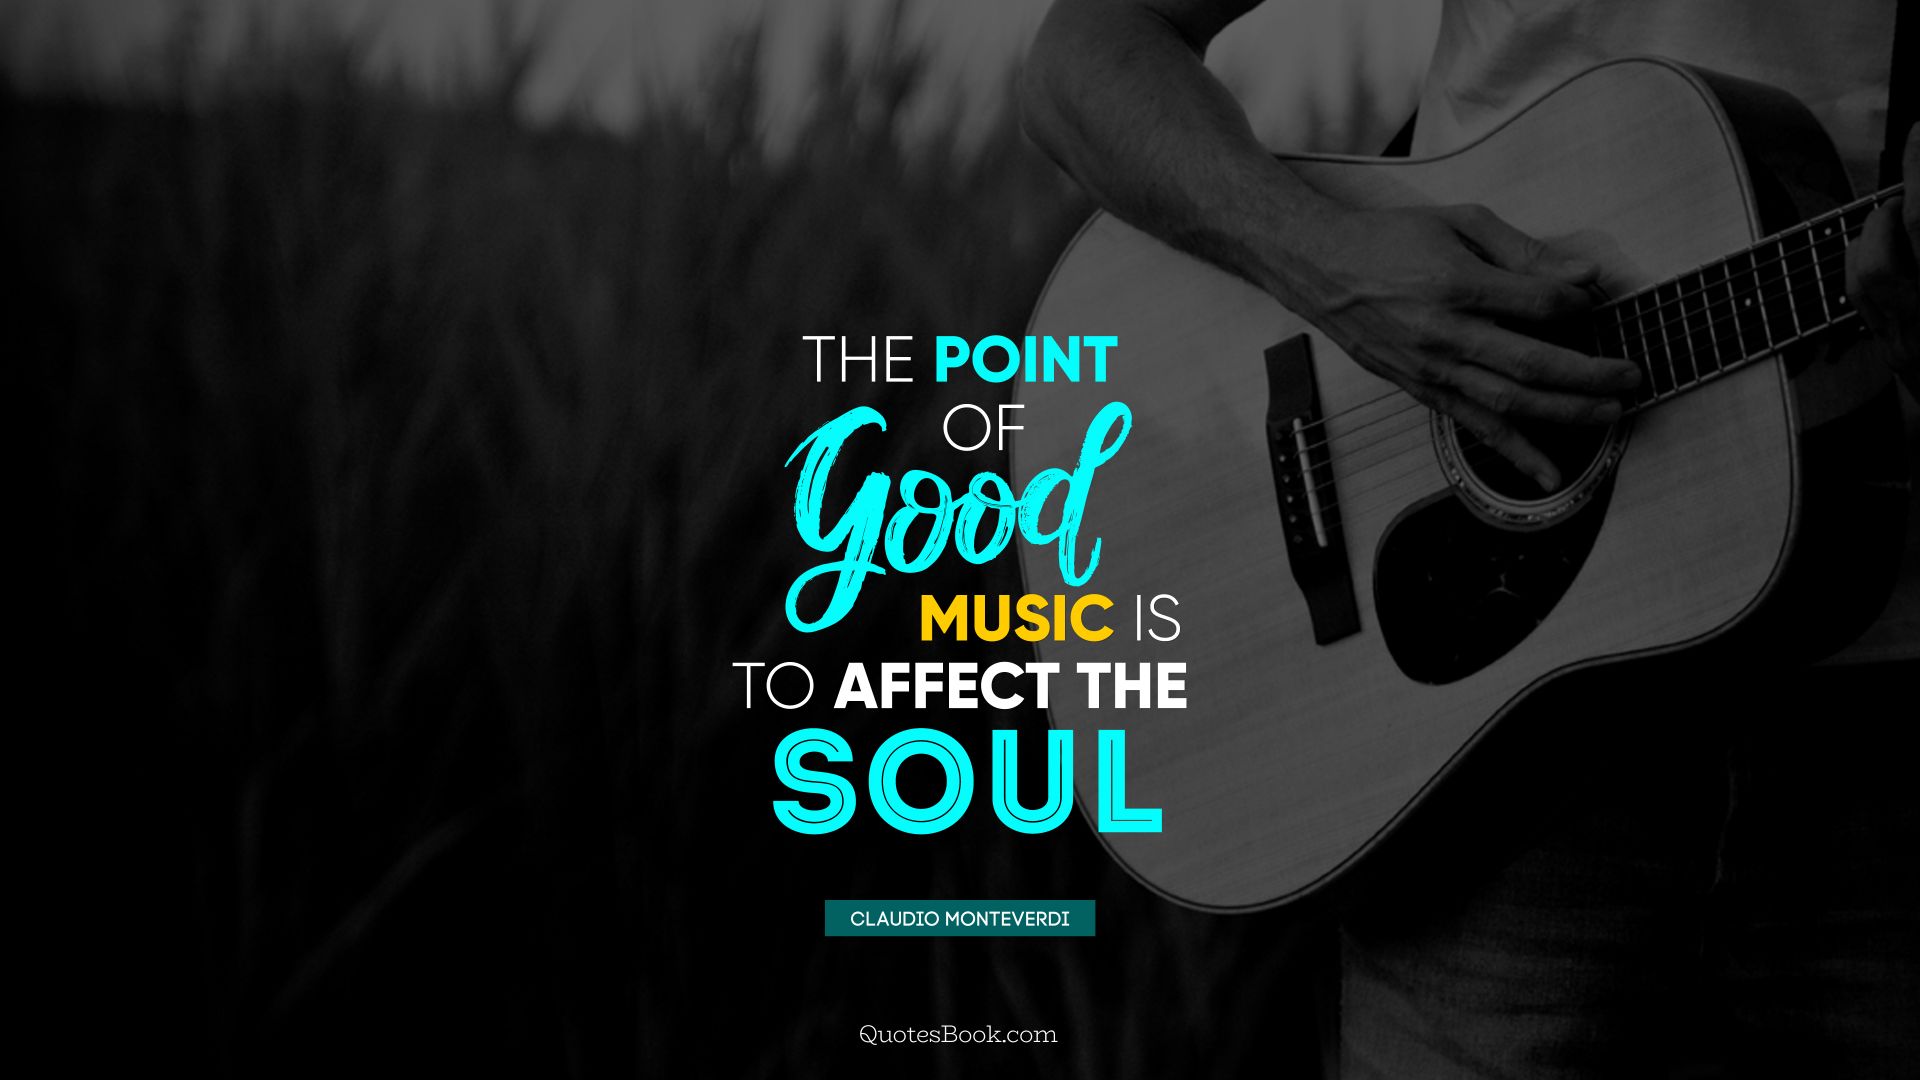 The point of good music is to affect the soul. - Quote by Claudio Monteverdi